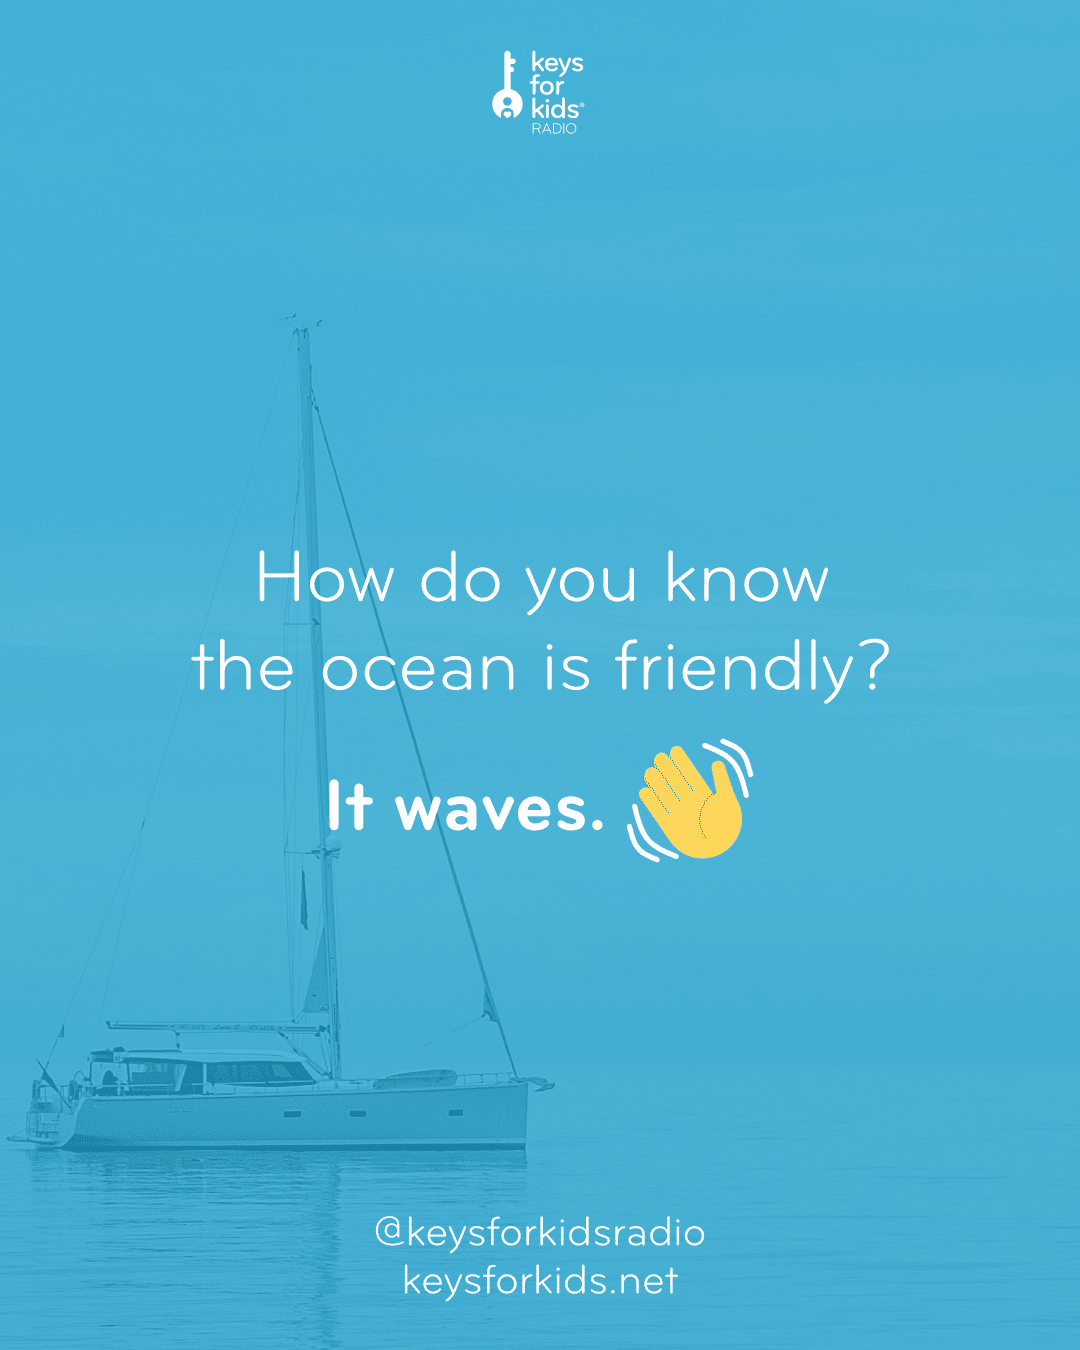 How do we know that the ocean is friendly? It waves.